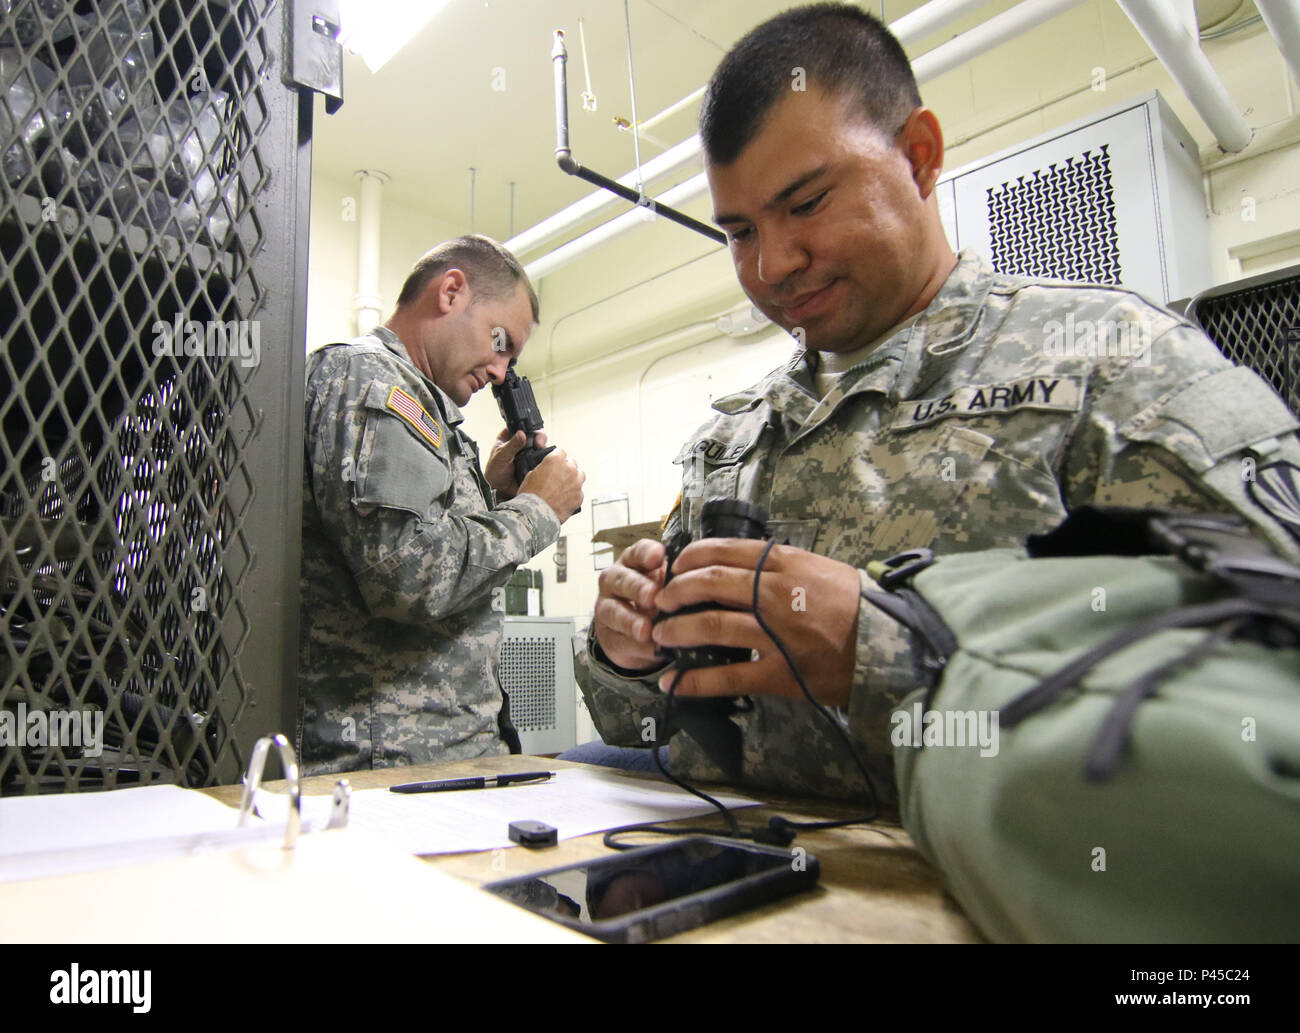 Arizona Army National Guard Spc. Thomas M. Ferguson and Sgt. Armono A. Aguilera, computer/detection systems repairers with the 3666th Support Maintenance Company, inspect PVS-14 night vision monoculars, June 22, at Fort Greely, Alaska, which is located approximately 100 miles southeast of Fairbanks, Alaska. The Arizona Guardsmen were part of a mobile repair team that inspected weapons and night vision optics for the Alaska National Guard’s 49th Missile Defense Battalion. (Arizona Army National Guard photo by Staff Sgt. Brian A. Barbour) Stock Photo